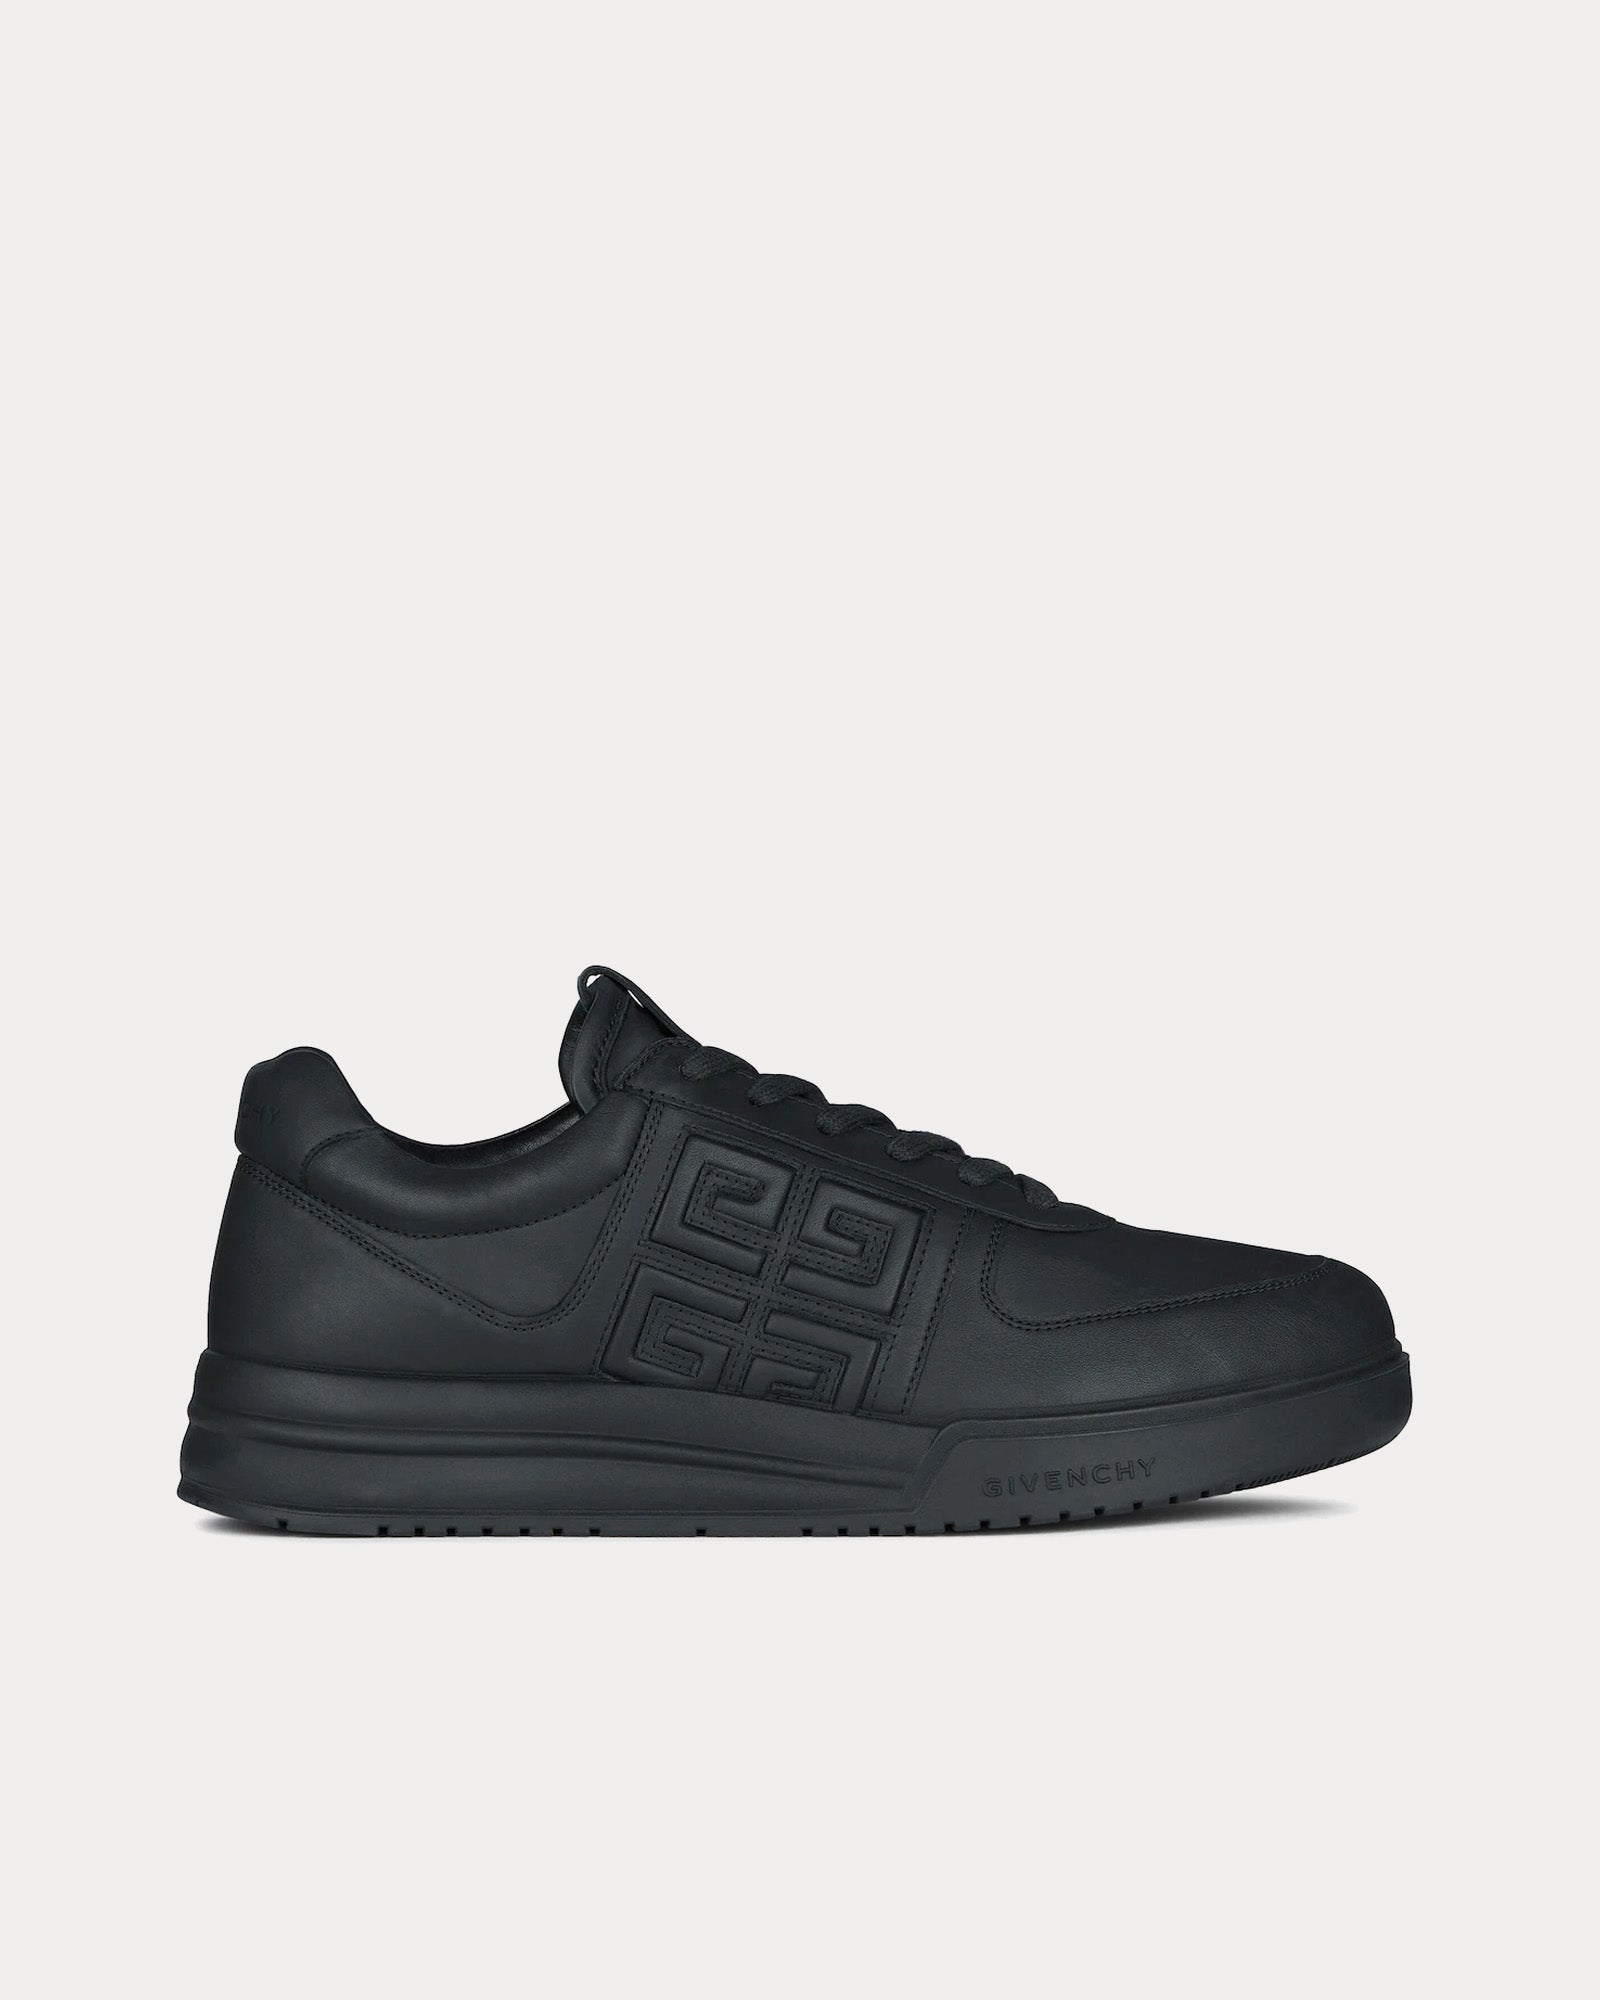 Givenchy - G4 Leather Black Low Top Sneakers